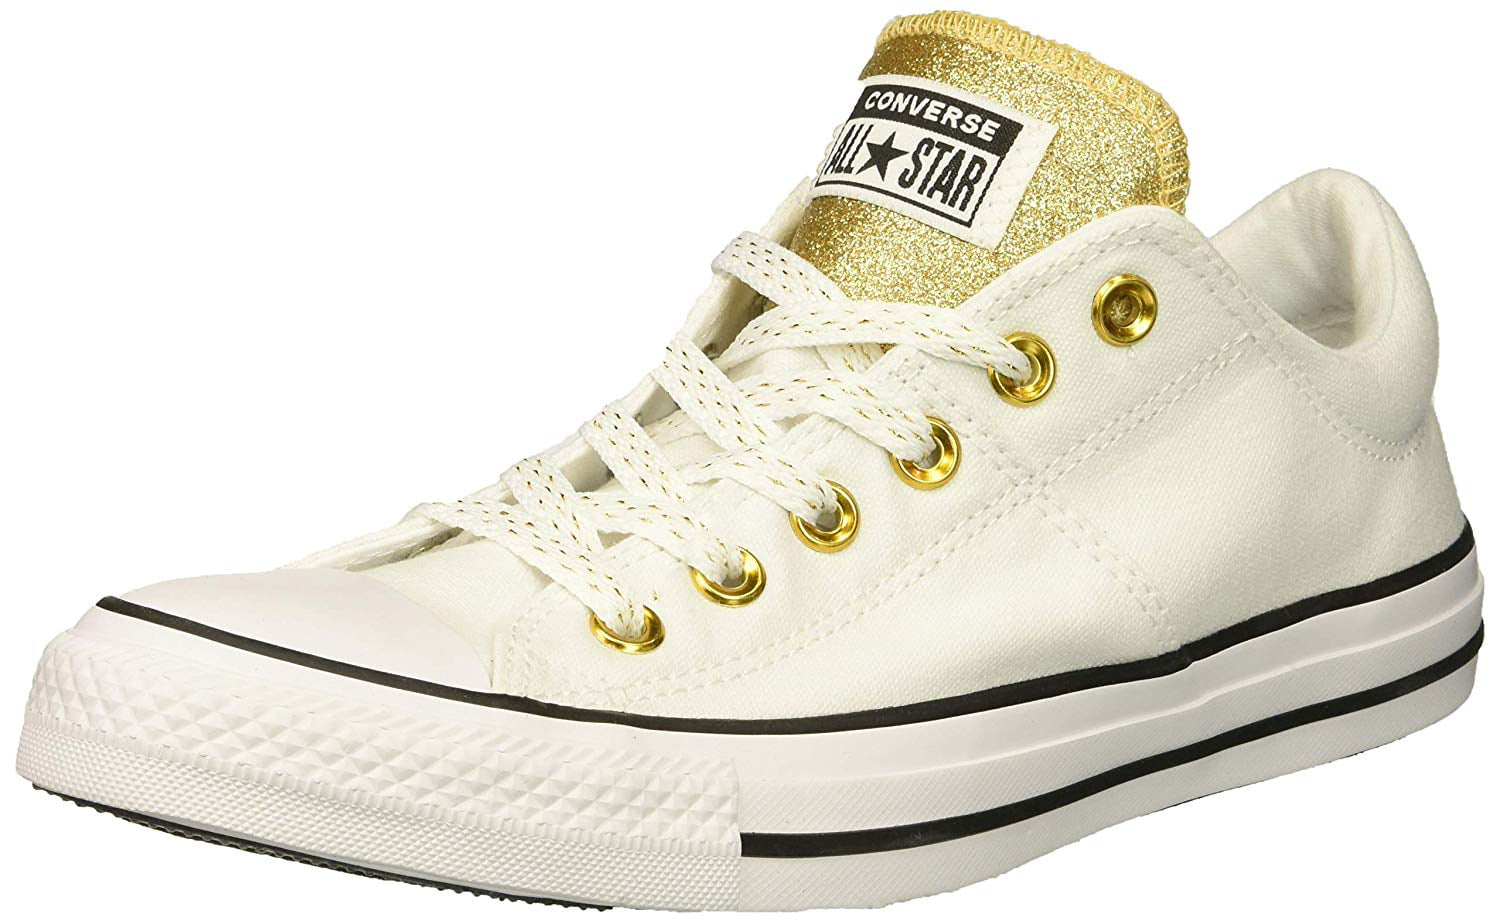 Chuck Taylor All Star Madison Low 